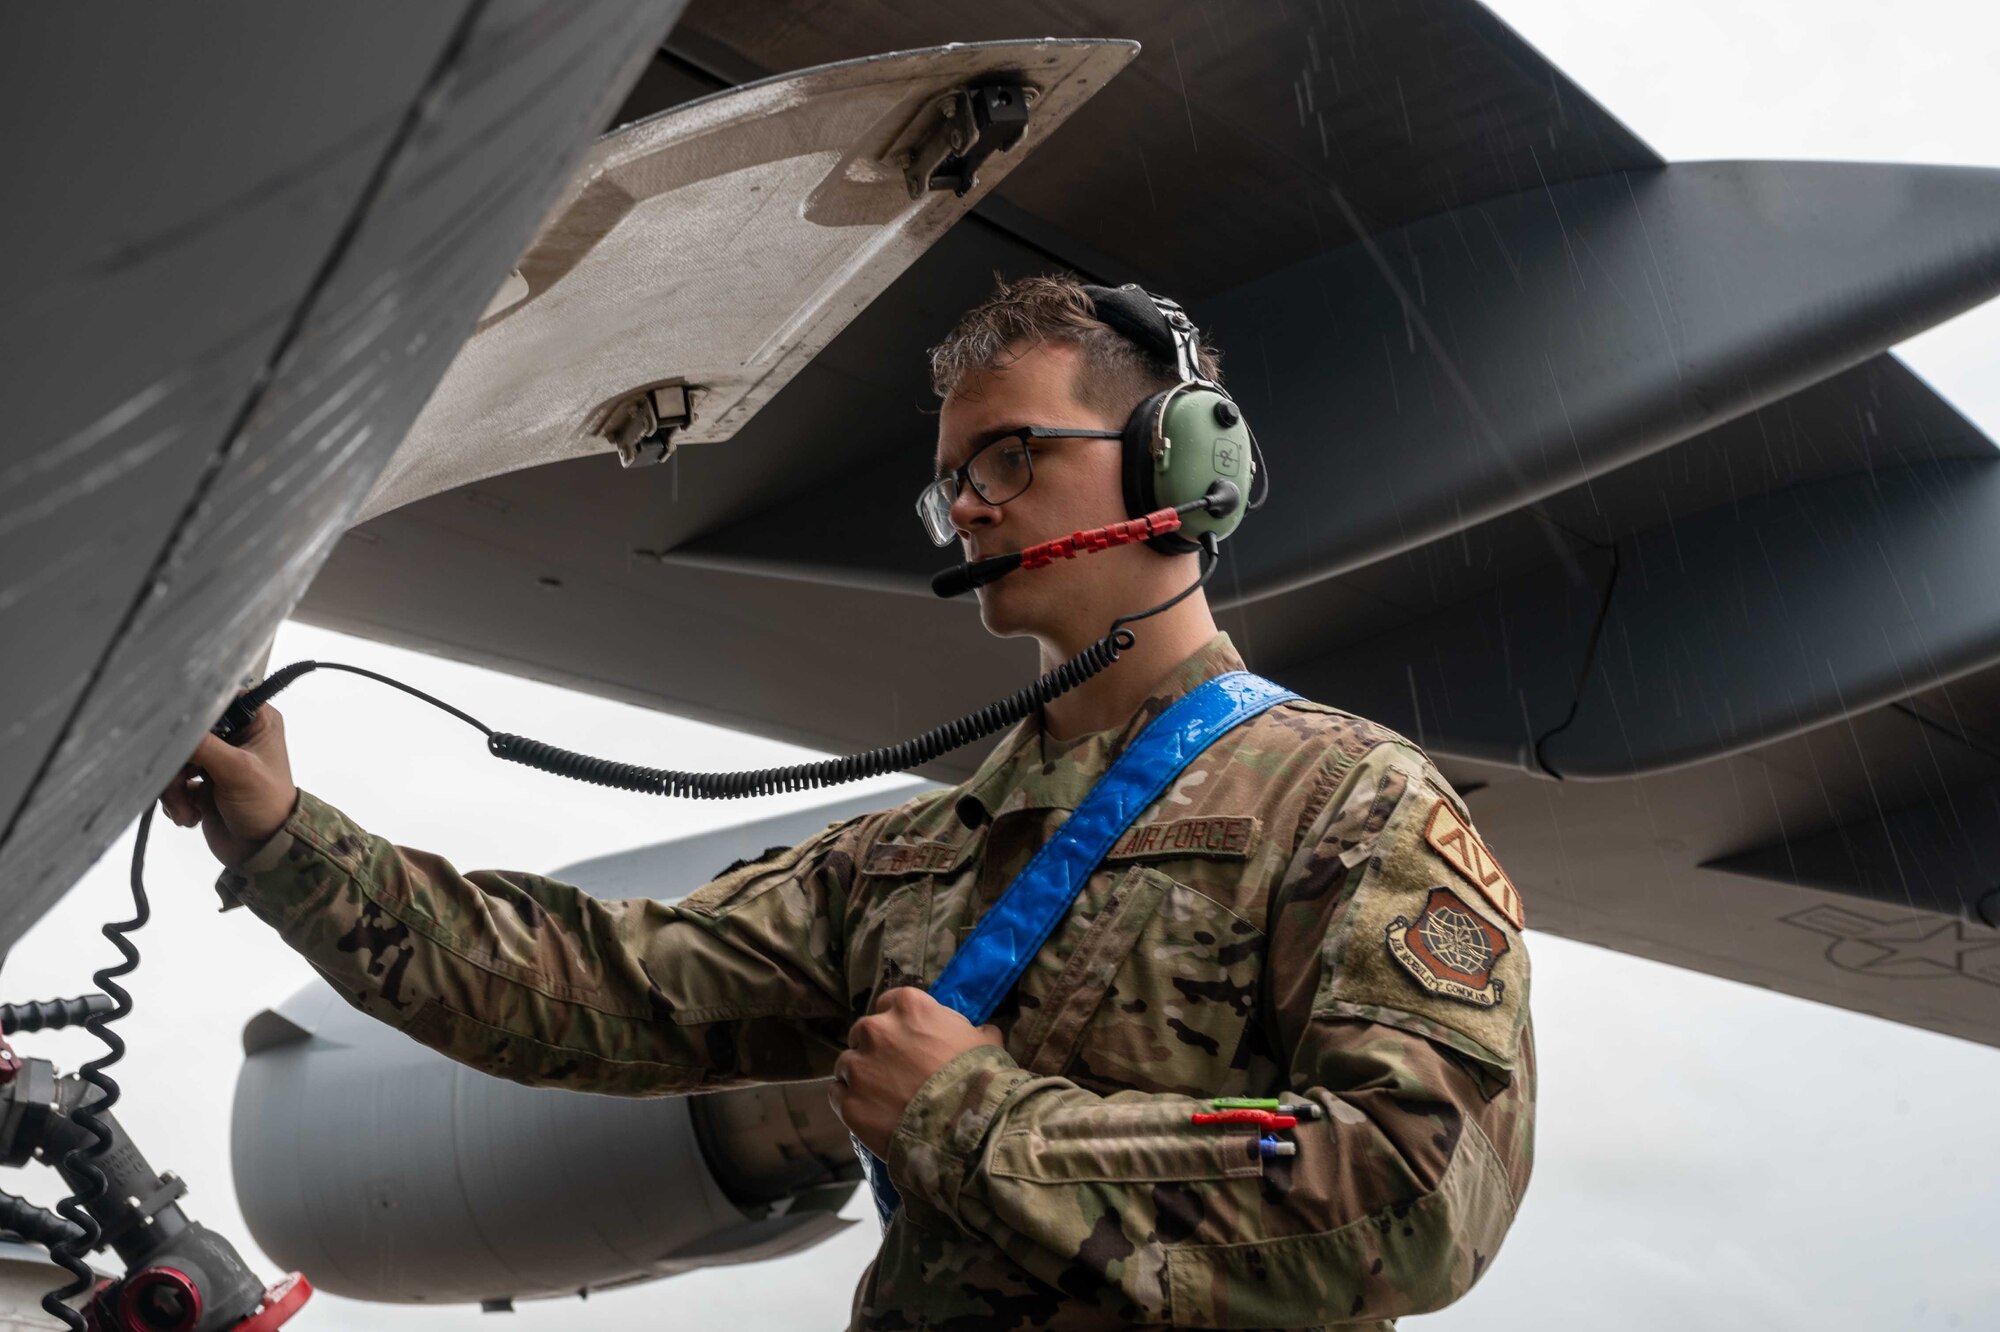 Airman 1st Class Ethan Brister, 736th Aircraft Maintenance Squadron communication navigation specialist, refuels a C-17 Globemaster III before a local training mission at Dover Air Force Base, Delaware, May 24, 2022. The 736th AMXS is responsible for the inspection, repair, launch and recovery of 13 assigned C-17s at Dover AFB. (U.S. Air Force photo by Senior Airman Faith Schaefer)